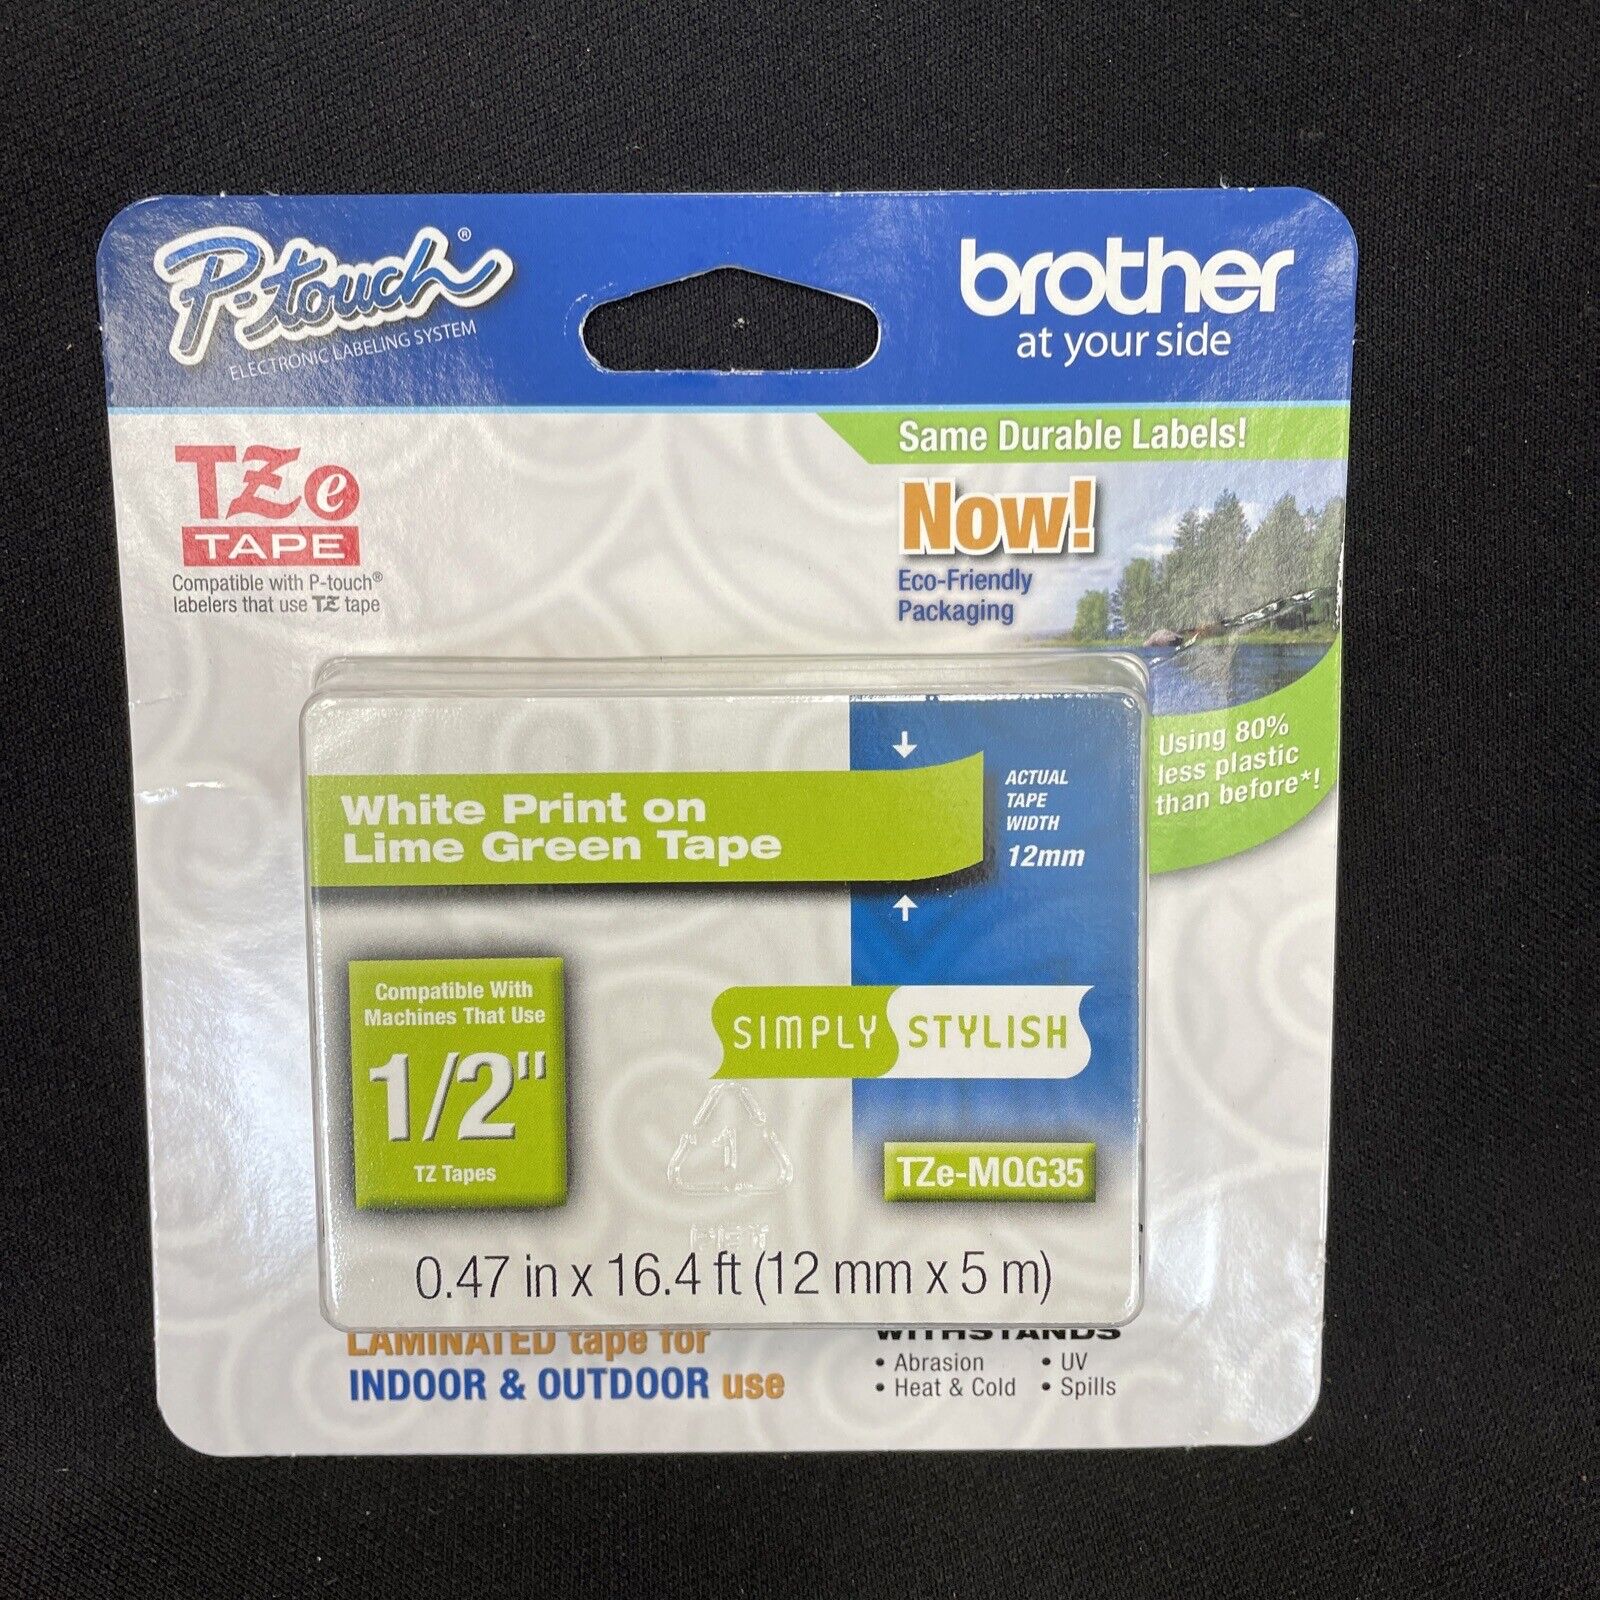 Brother P-touch TZe Tape 1/2